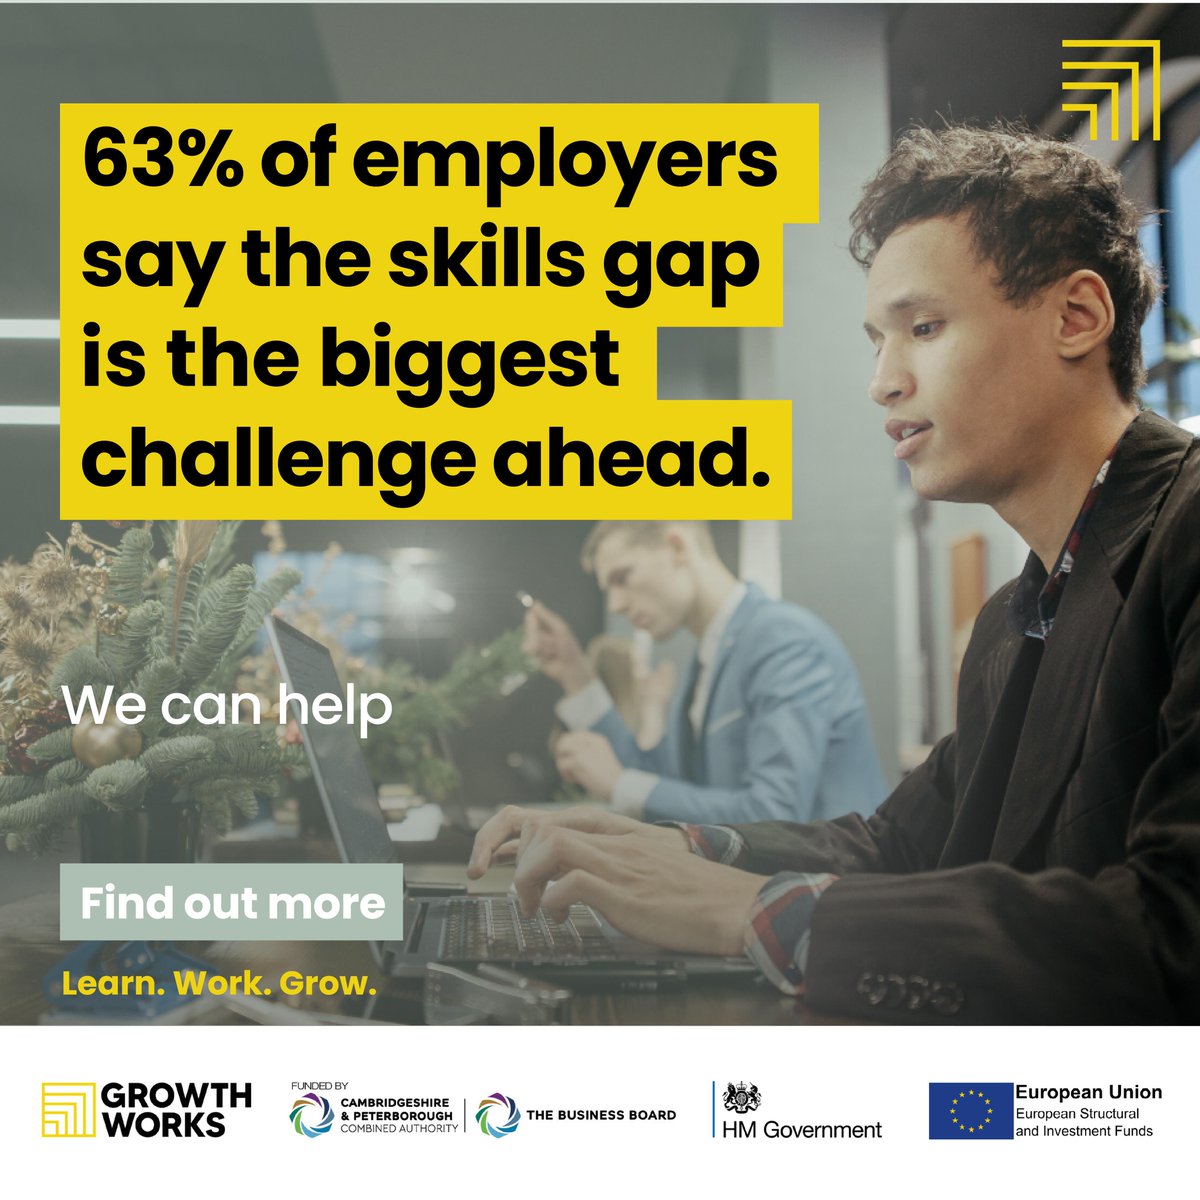 63% of recruiters say talent shortage is their biggest problem ahead 
bit.ly/3BaemXb

Are you one of them? Our team can help. 

Head over to the website to learn more>> bit.ly/3Pq6JkR

#growthworkswithskills #recruitment #talentshortages #challenge #employers